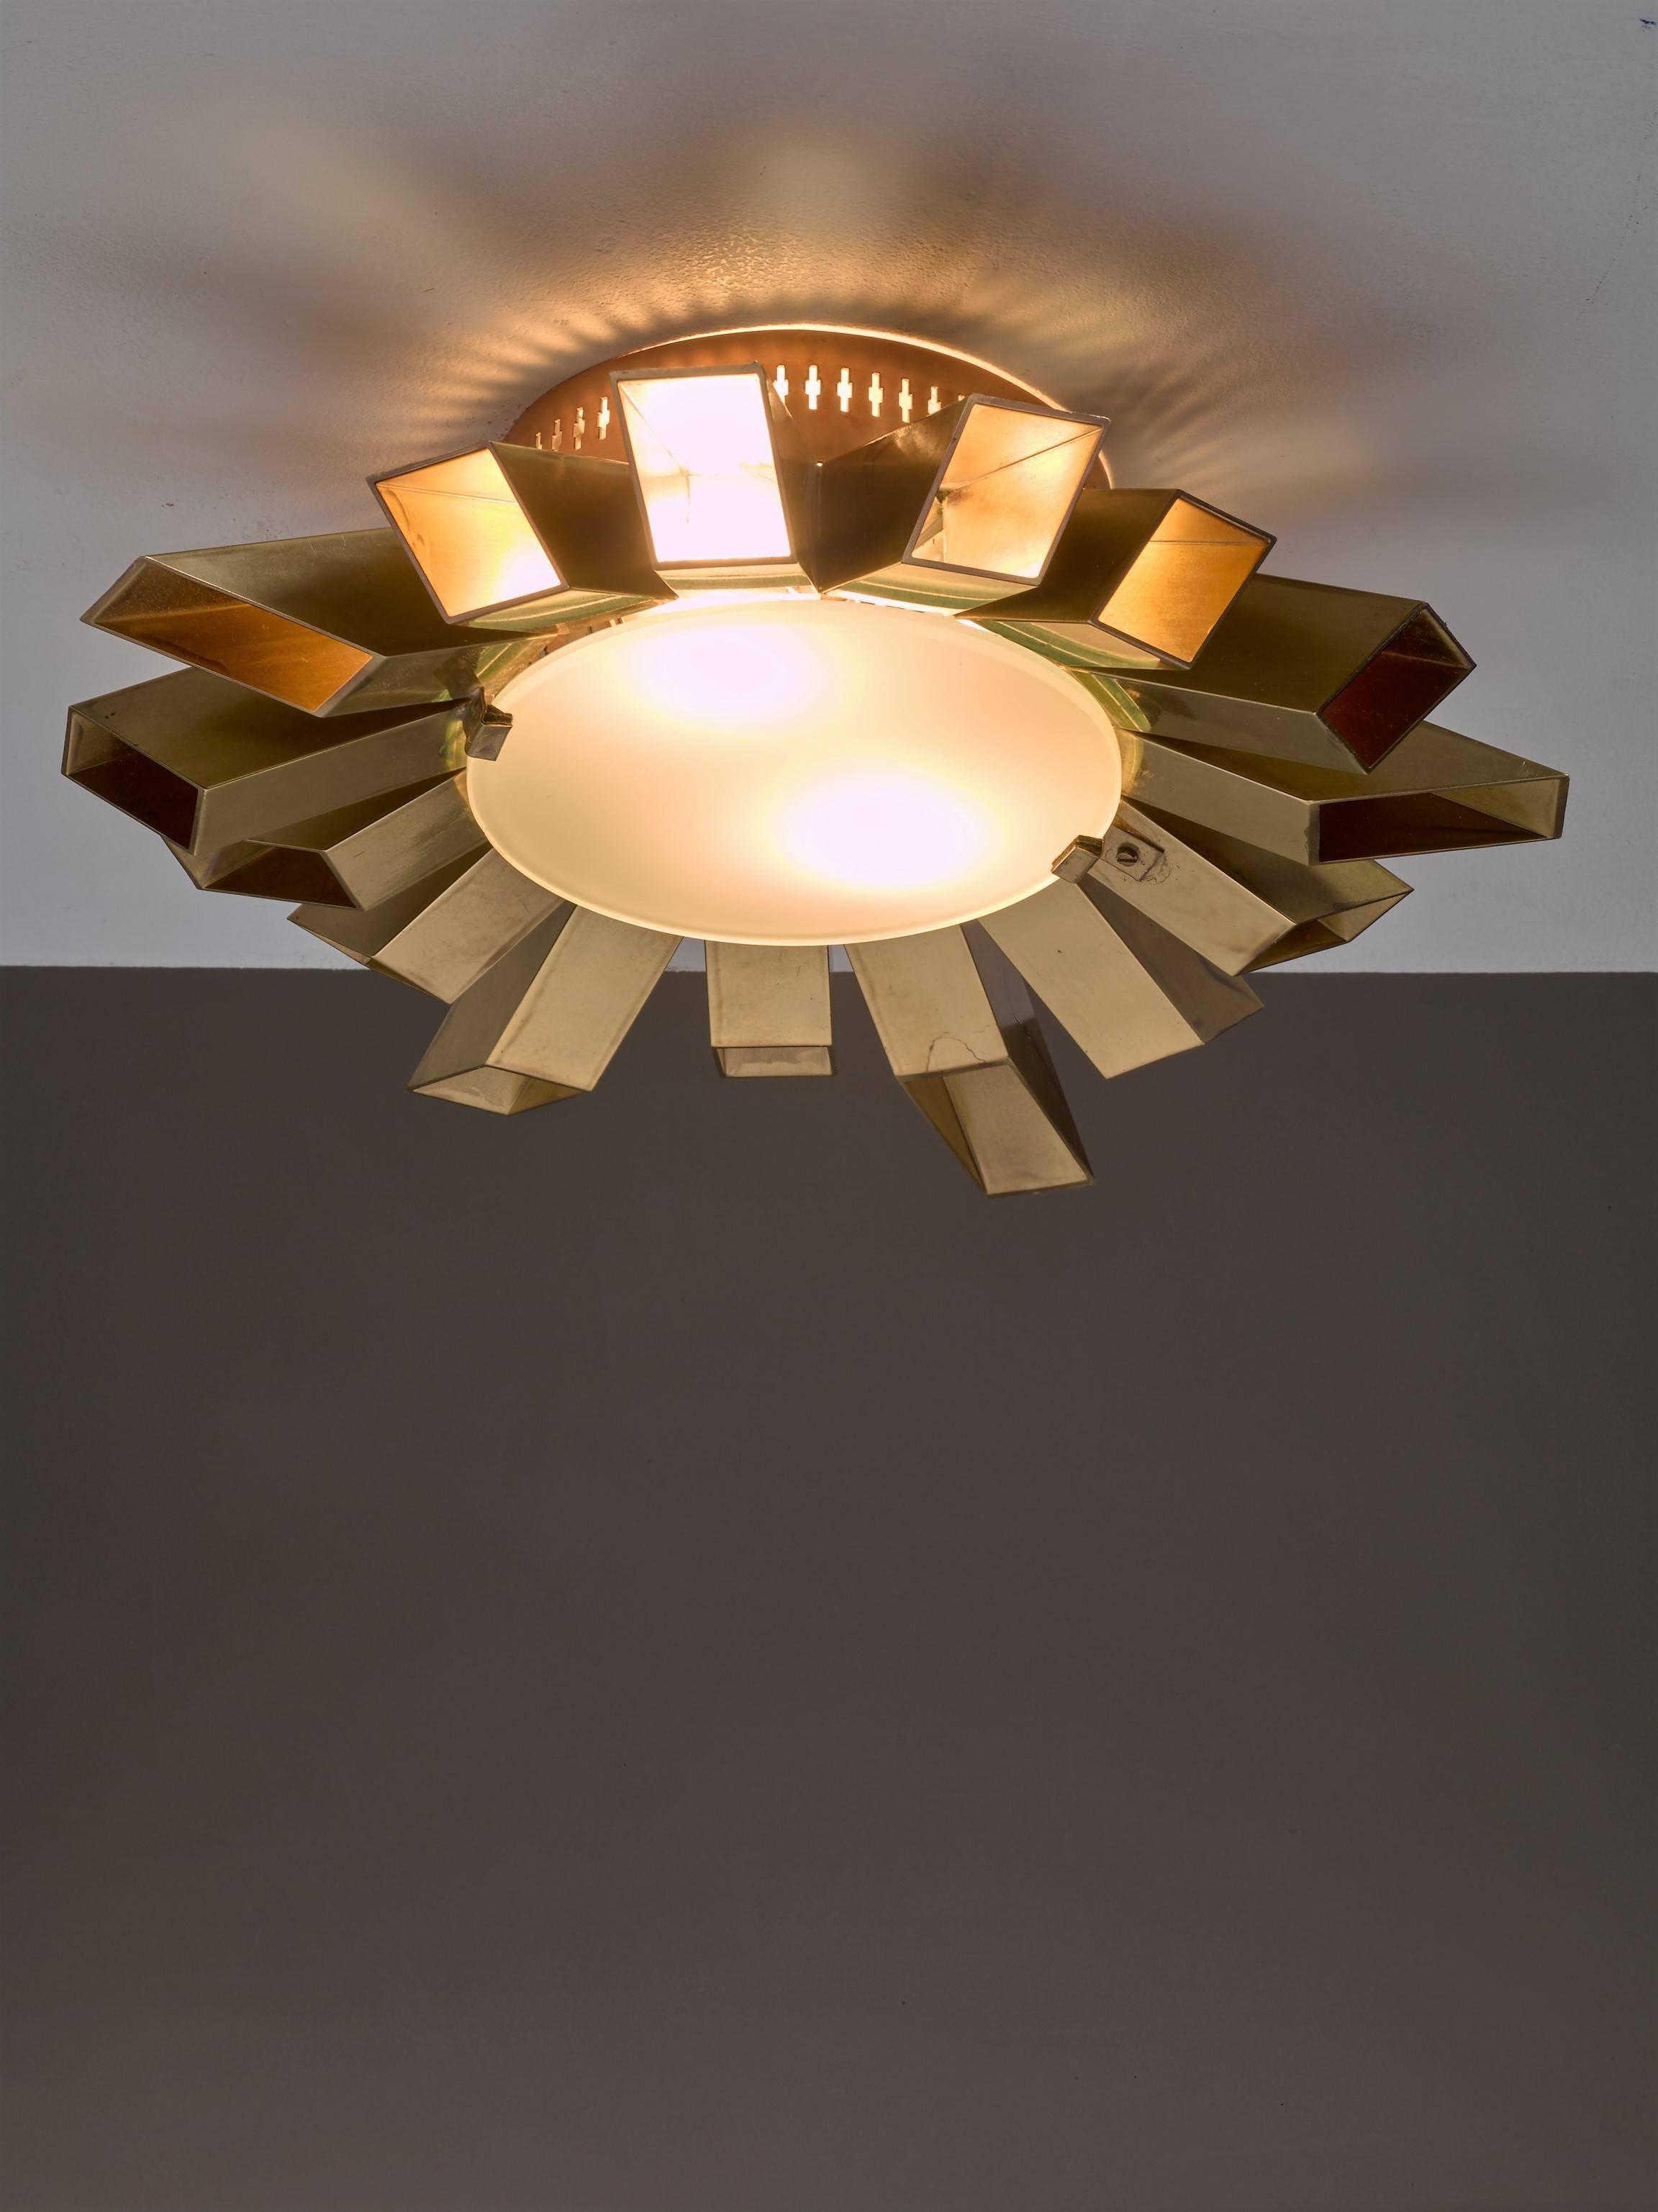 An exeptional Swedish Mid-Century flush mount 'sunburst' ceiling lamp, made of 15 brass elements that spread outward from the centre, like rays of sunshine. The lamp has two light bulbs and a double opaline glass diffuser in the centre.
Iit gives a